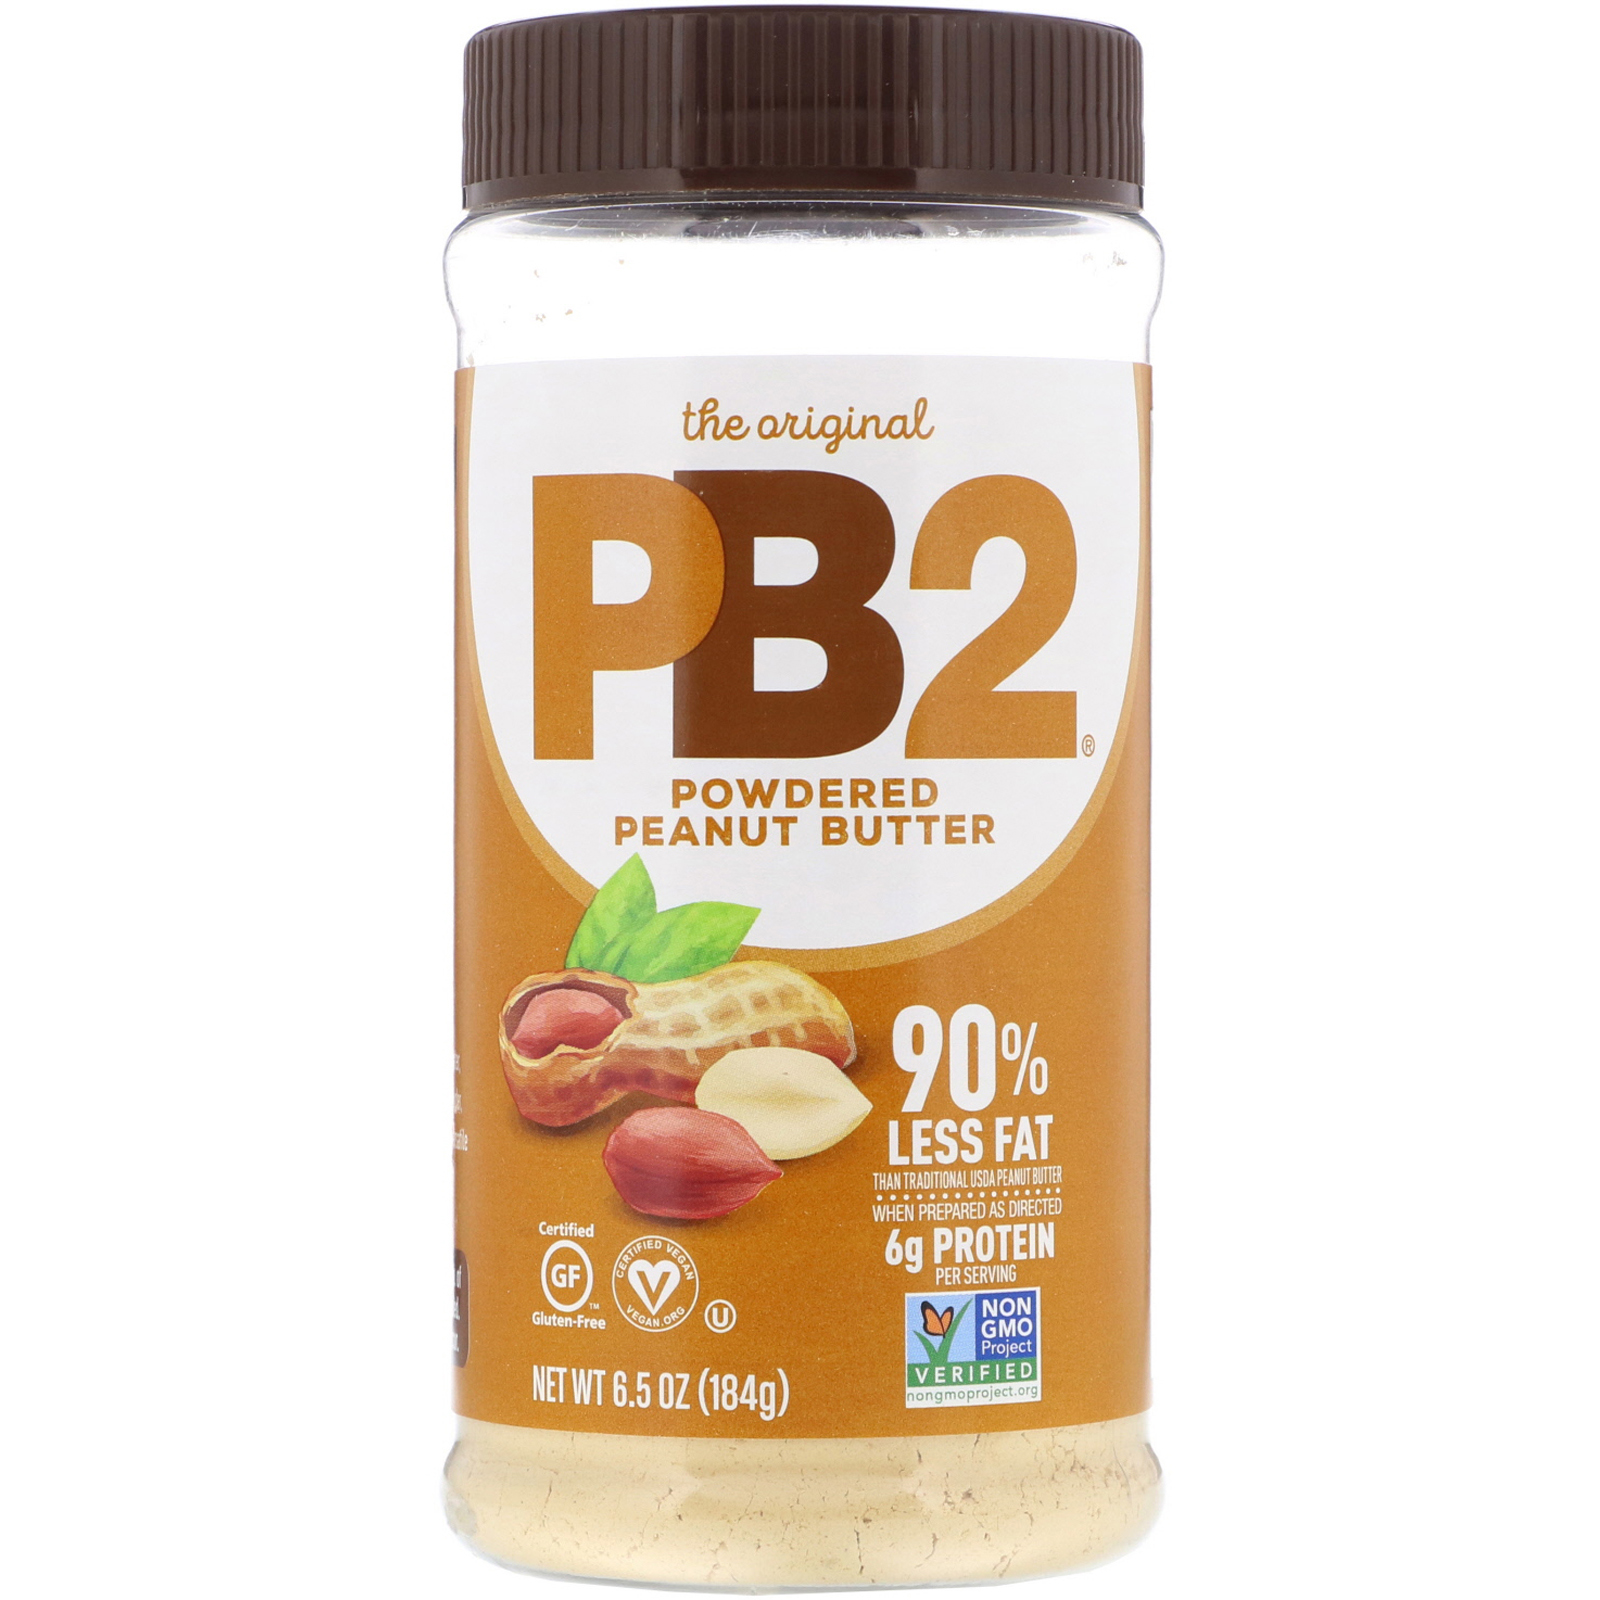 pb2 for dogs